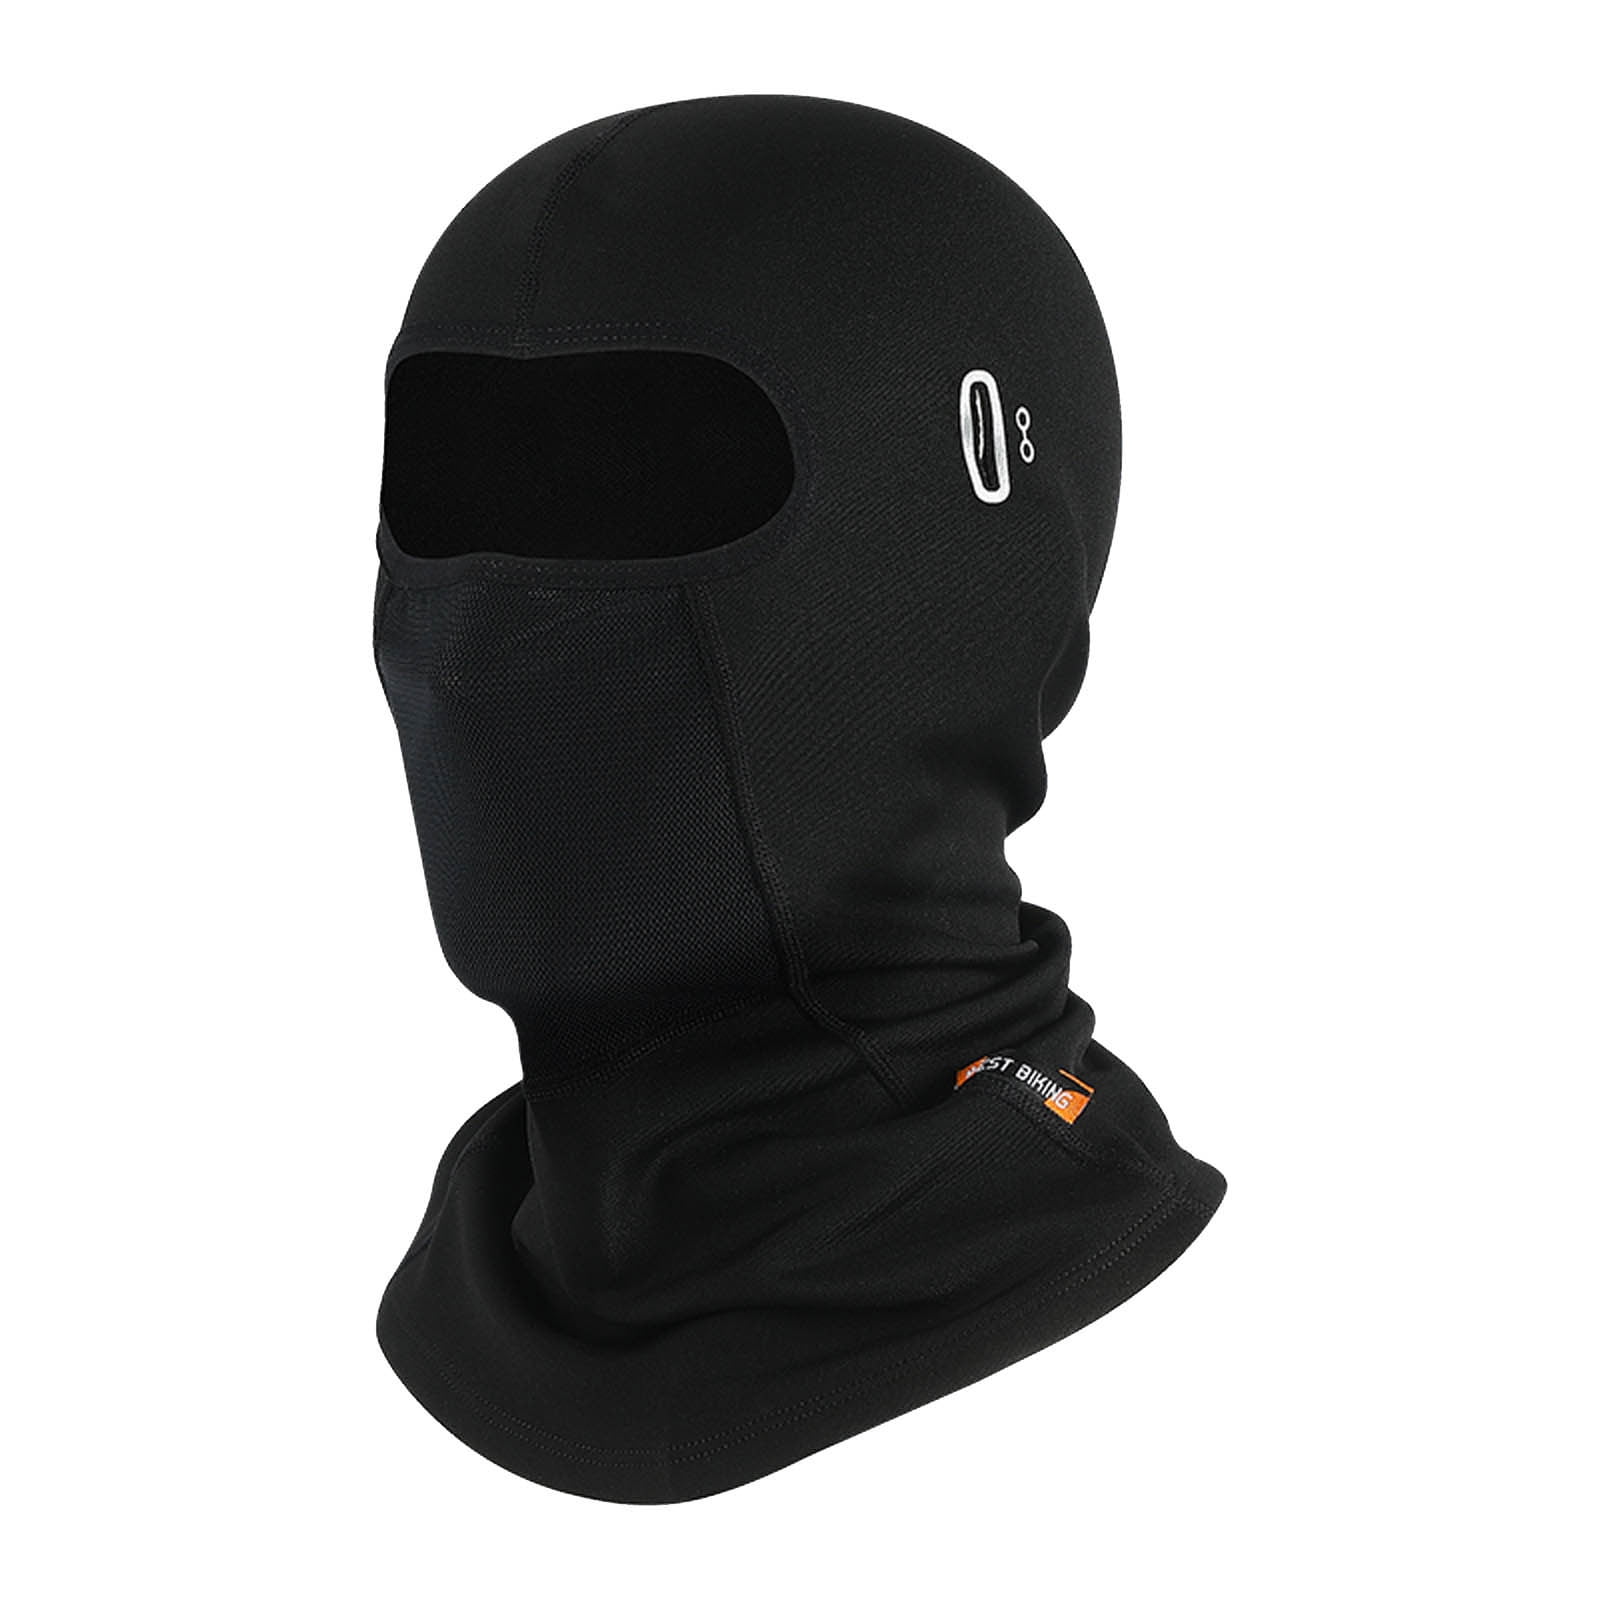 Kayannuo Clearance Warm Cover Motorcycle Face Mask Winter Cold ...